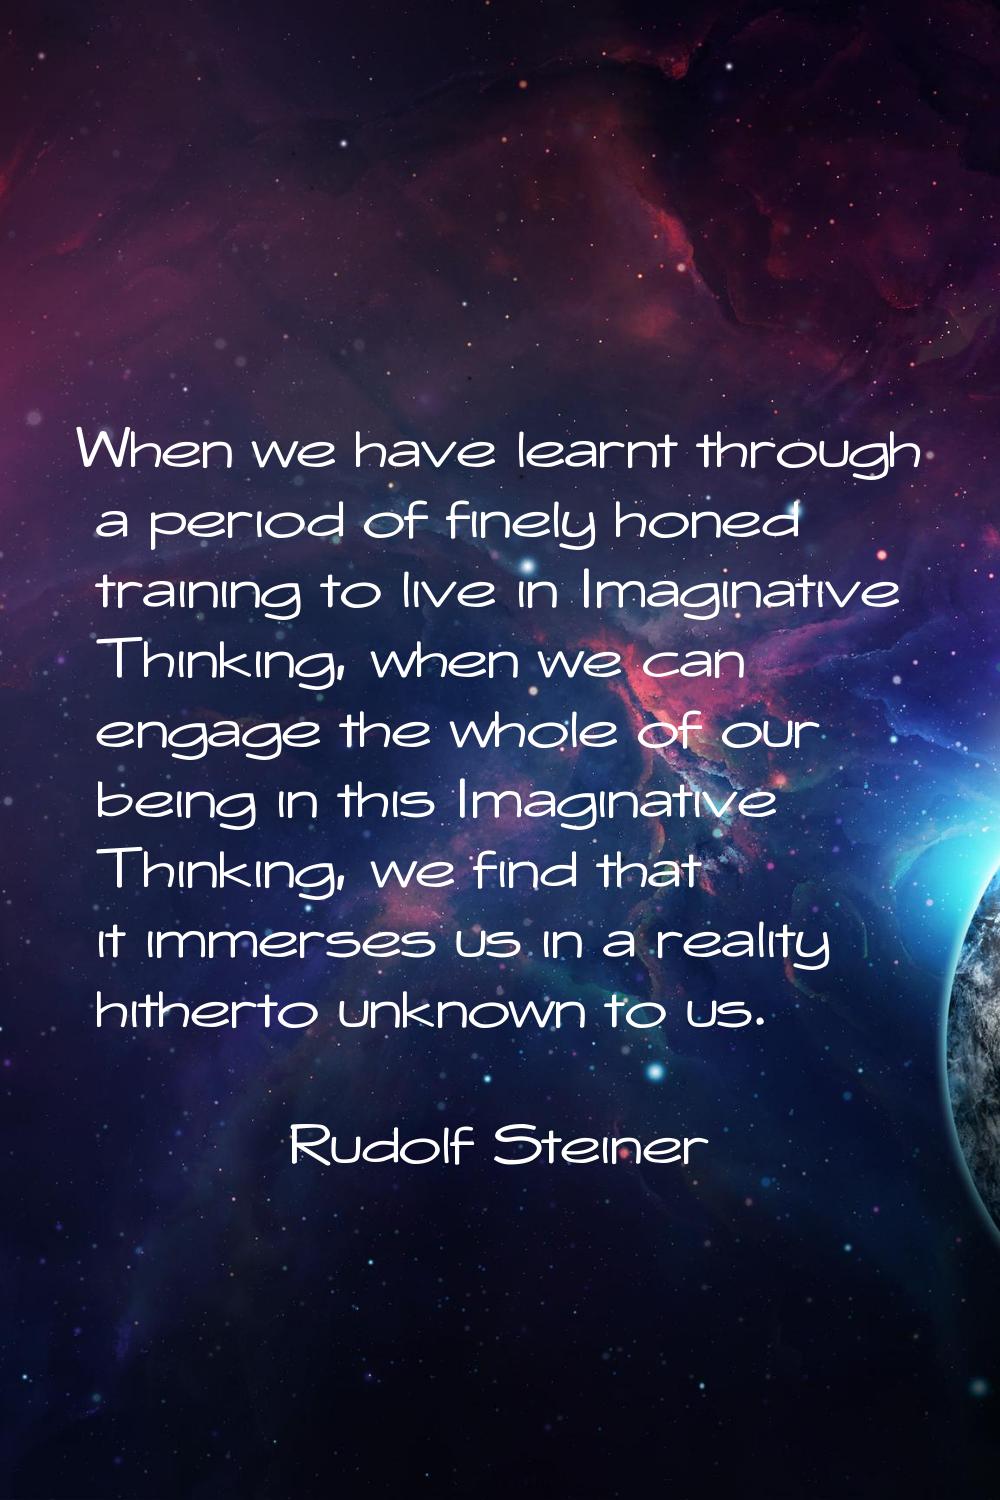 When we have learnt through a period of finely honed training to live in Imaginative Thinking, when